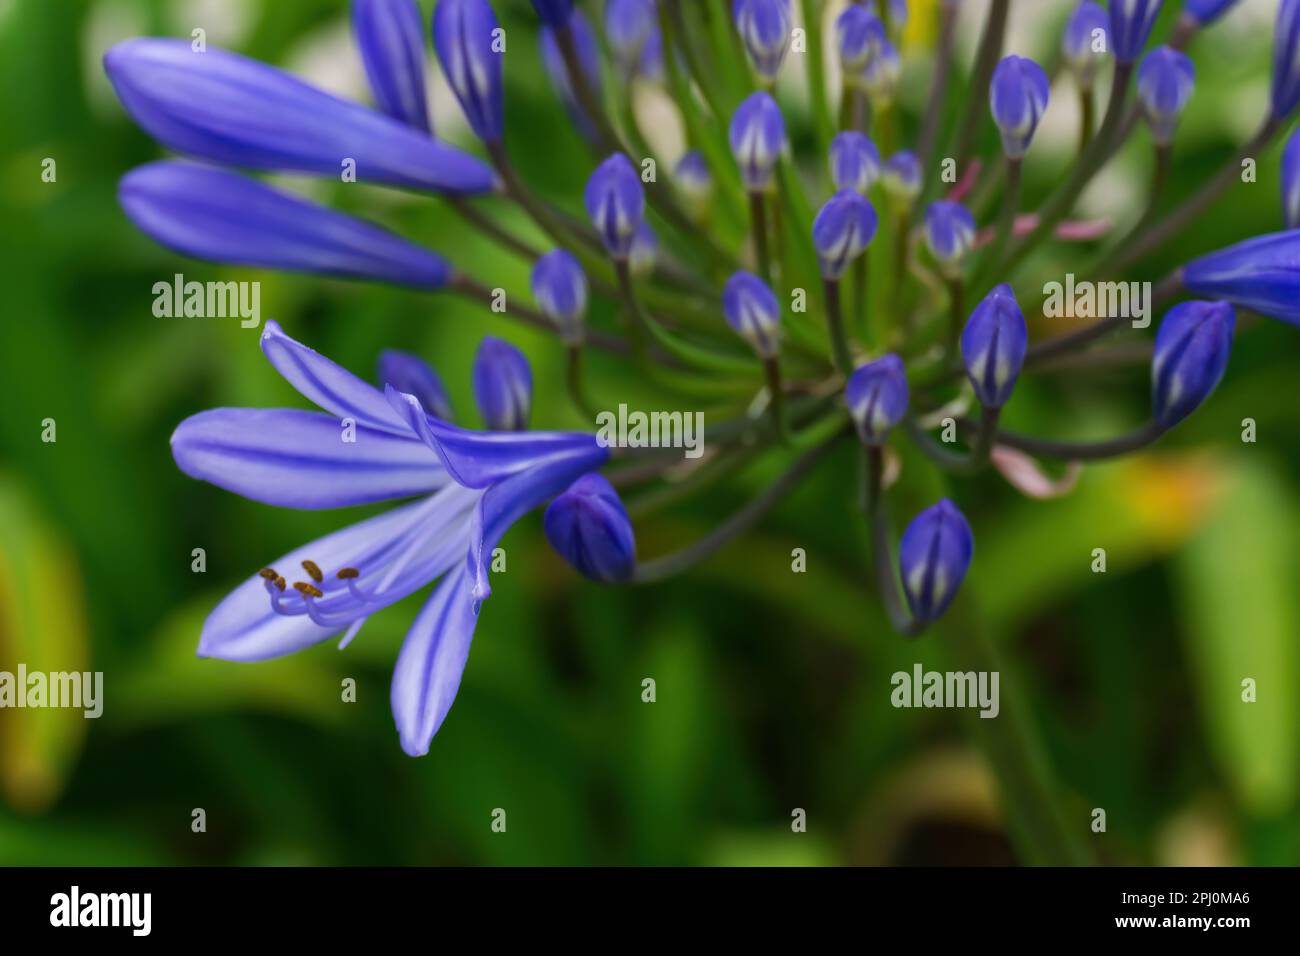 Lilac inflorescences of African Agapanthus in the garden close up Stock Photo